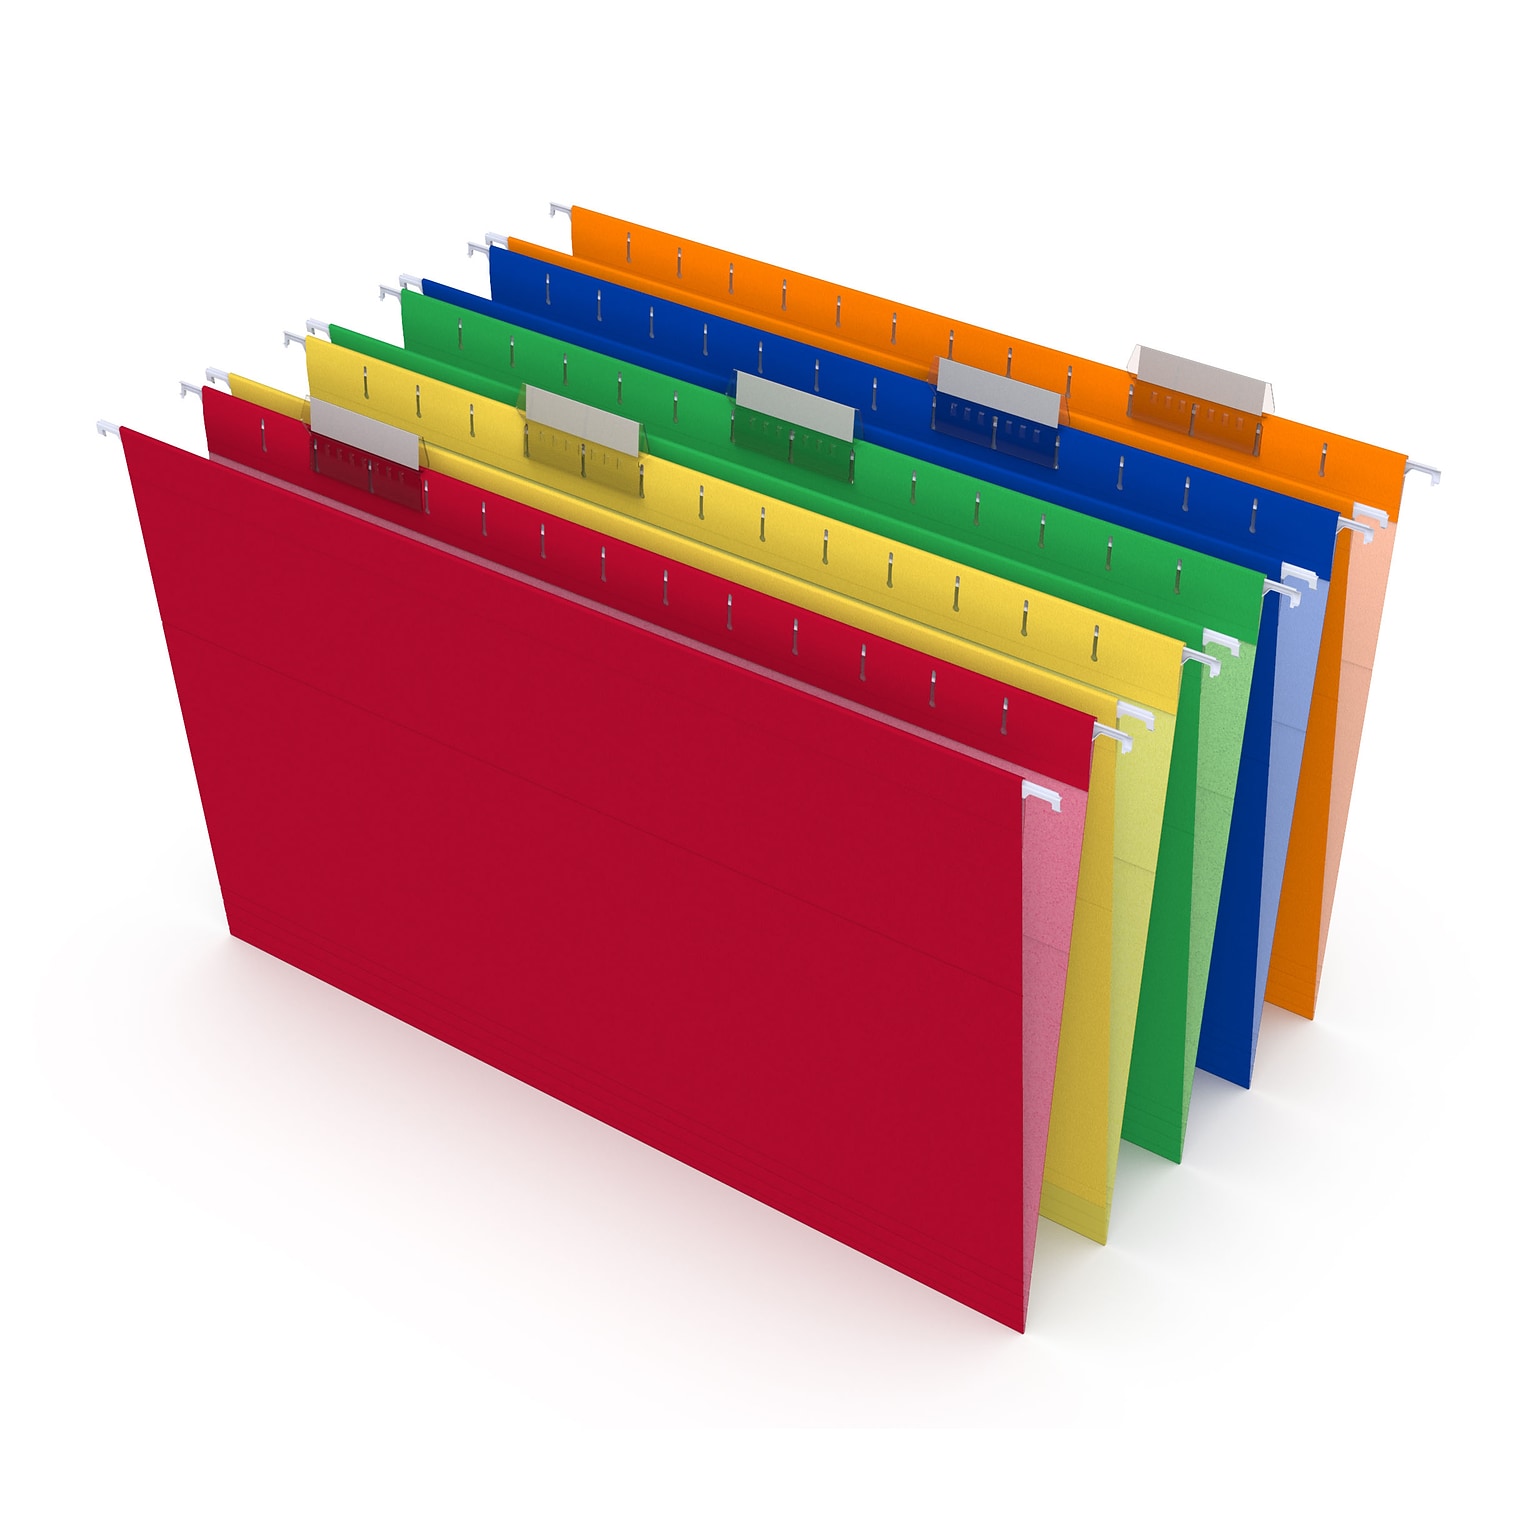 Staples® Heavy Duty Reinforced Hanging File Folders, 5-Tab, Legal Size, Assorted Colors, 25/Box (TR18657)